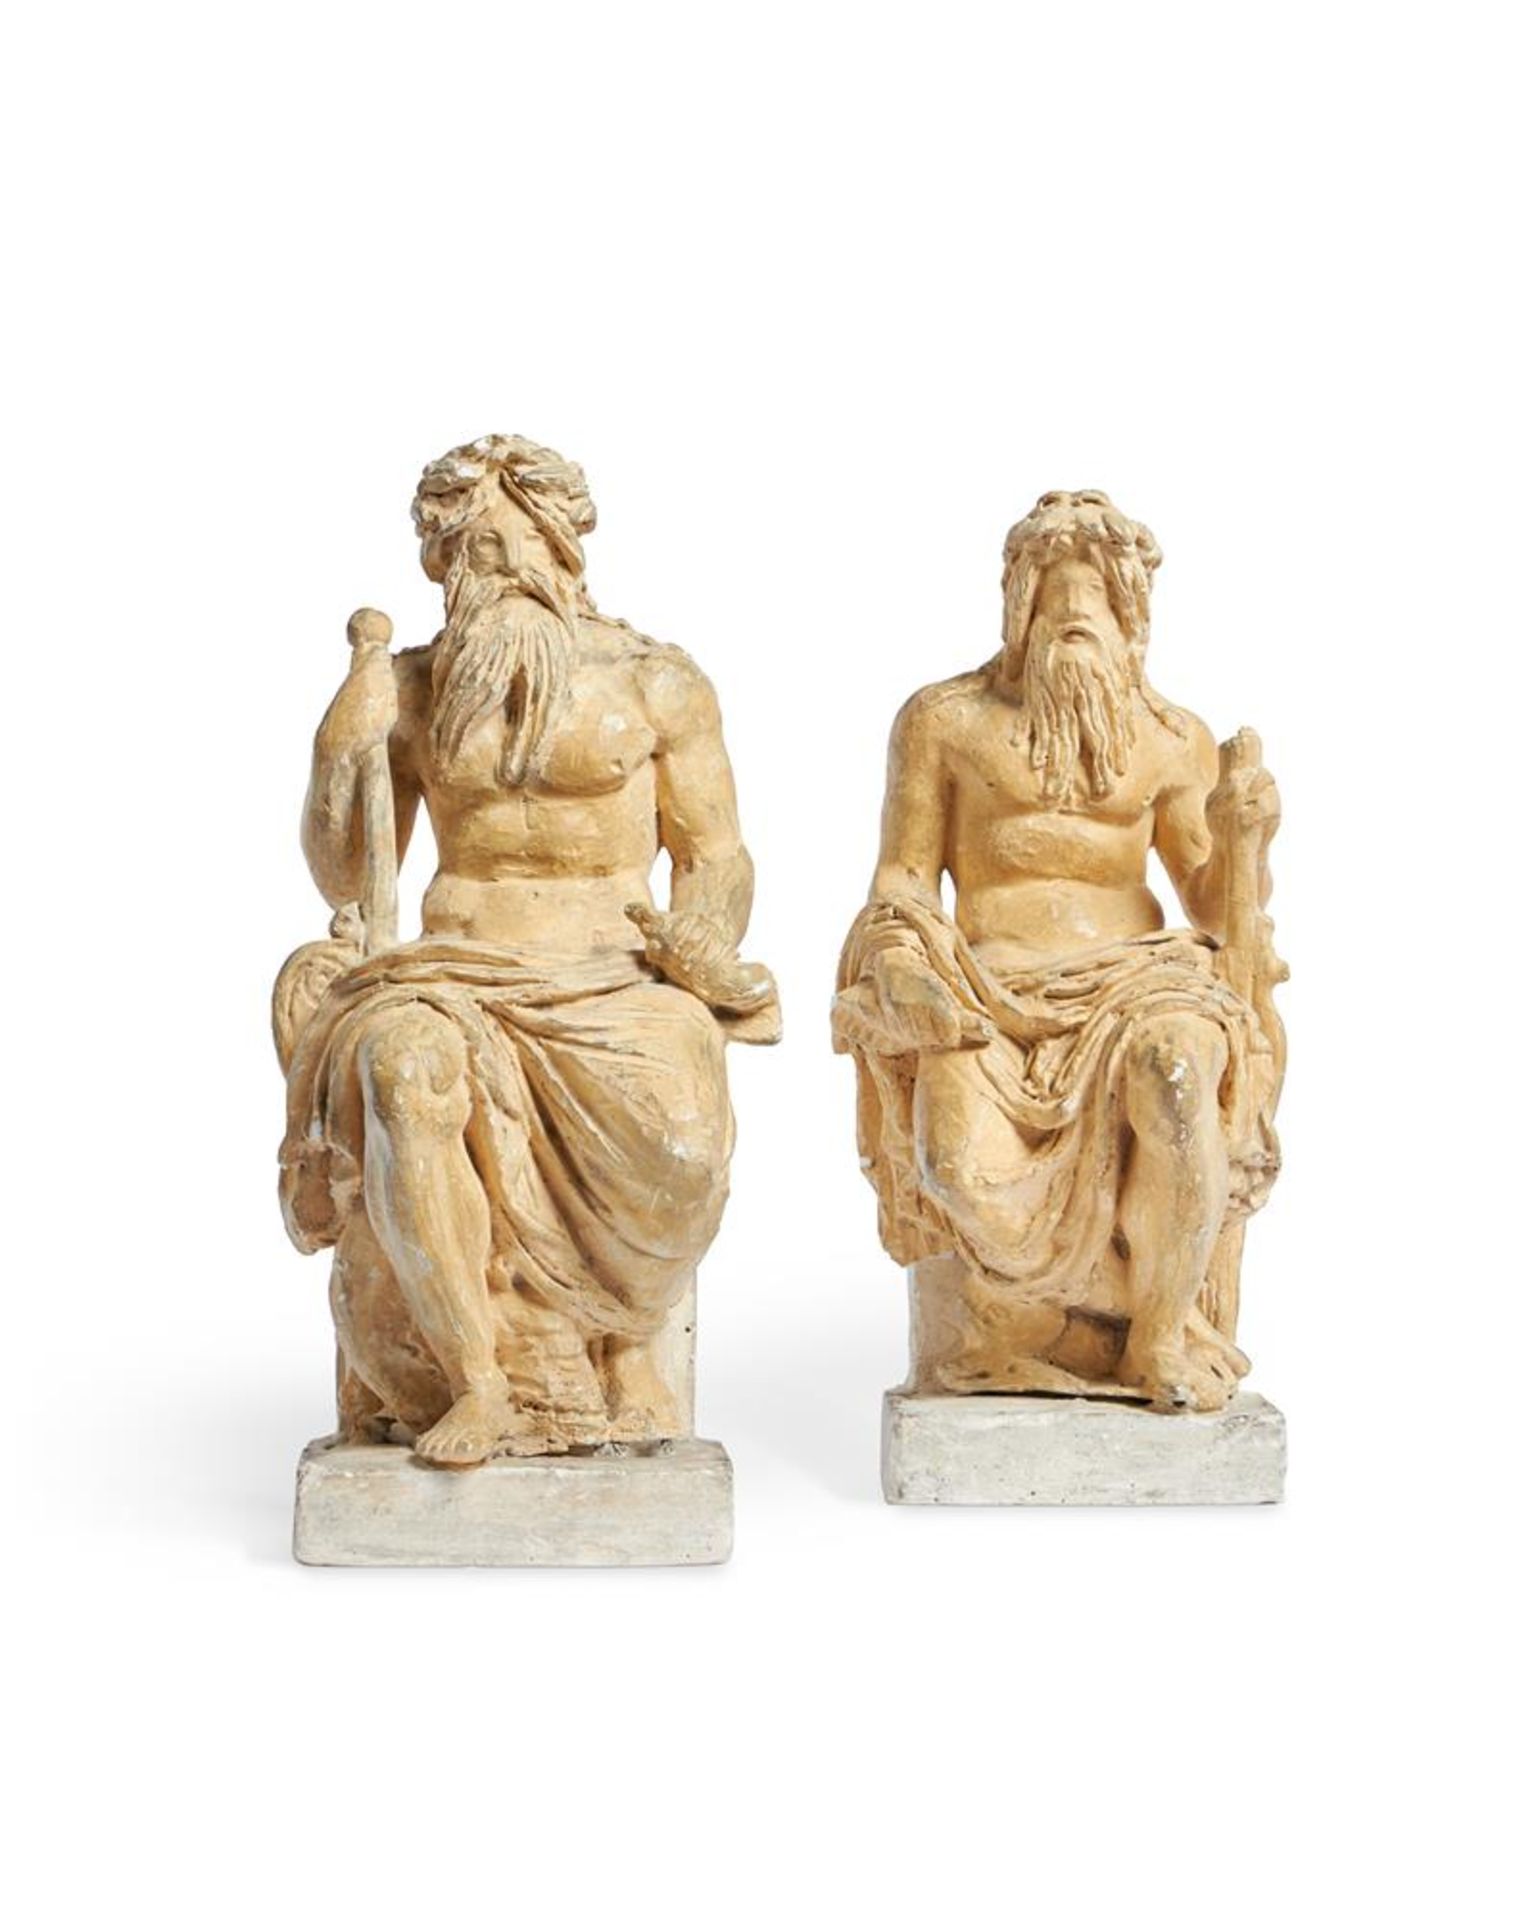 A PAIR OF ITALIAN PLASTER FIGURES OF SEATED RIVER GODS, EARLY 19TH CENTURY